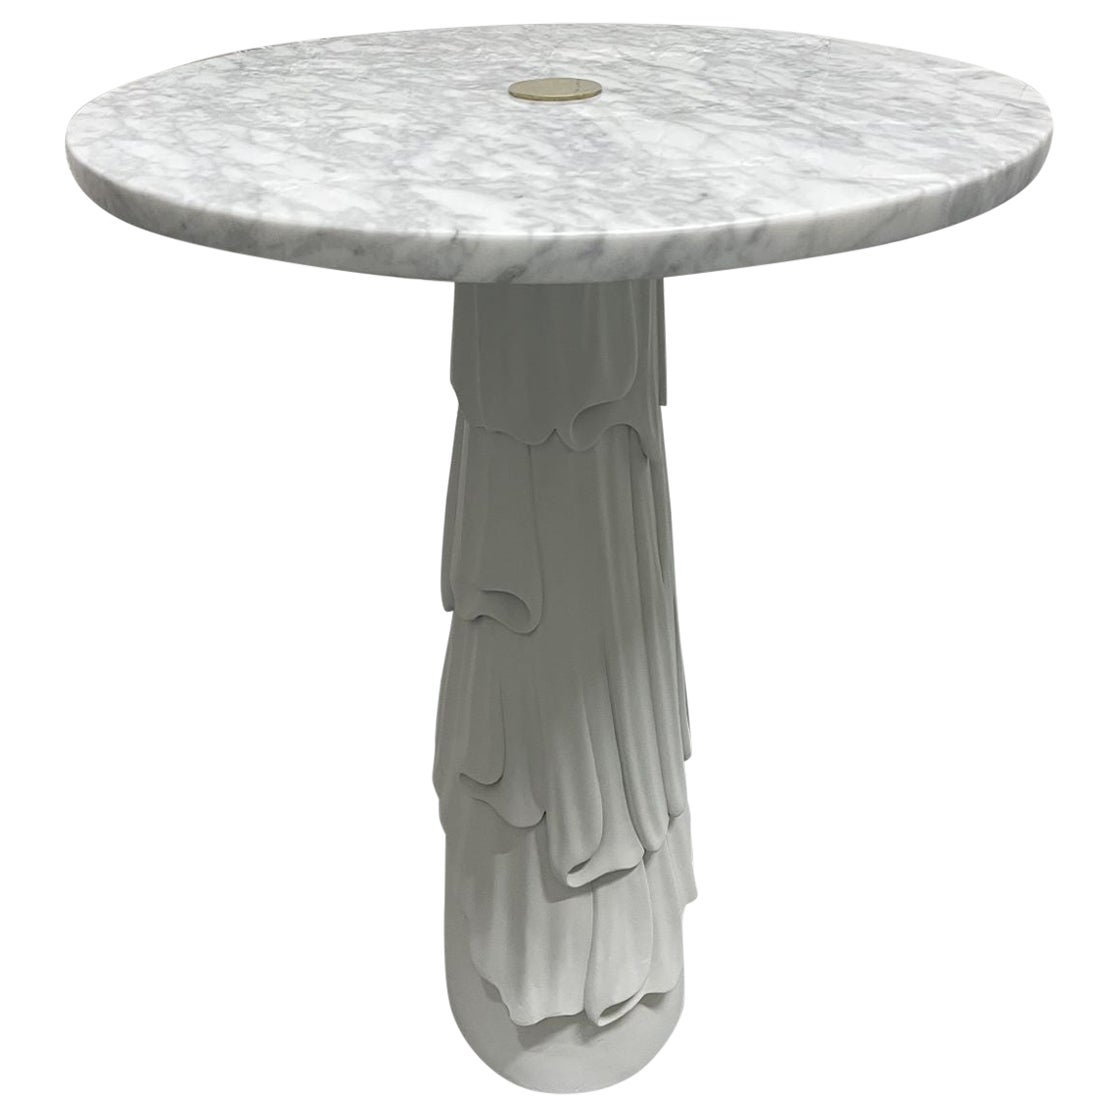 Decorative Carrara Marble Top Hollywood Regency Side Table For Sale